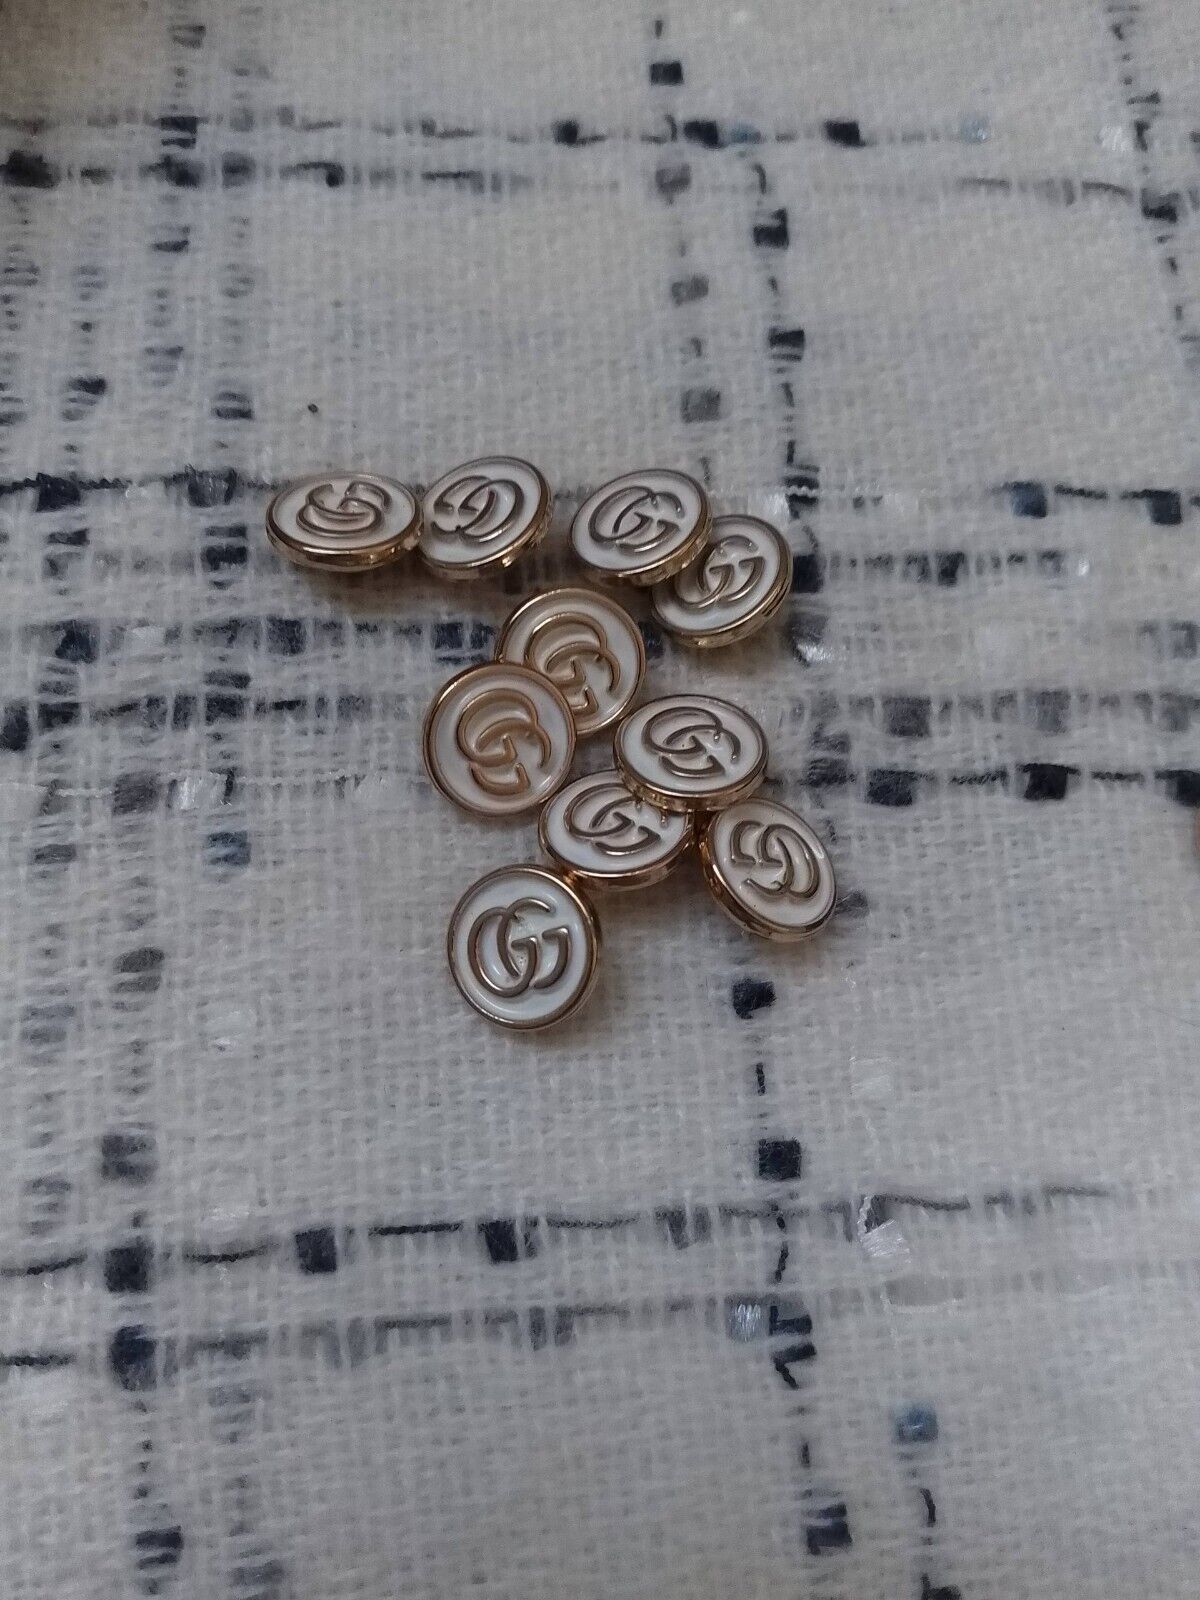 Lot of 10 Gucci  white buttons  GOLD tone  BUTTONS 13m tiny 